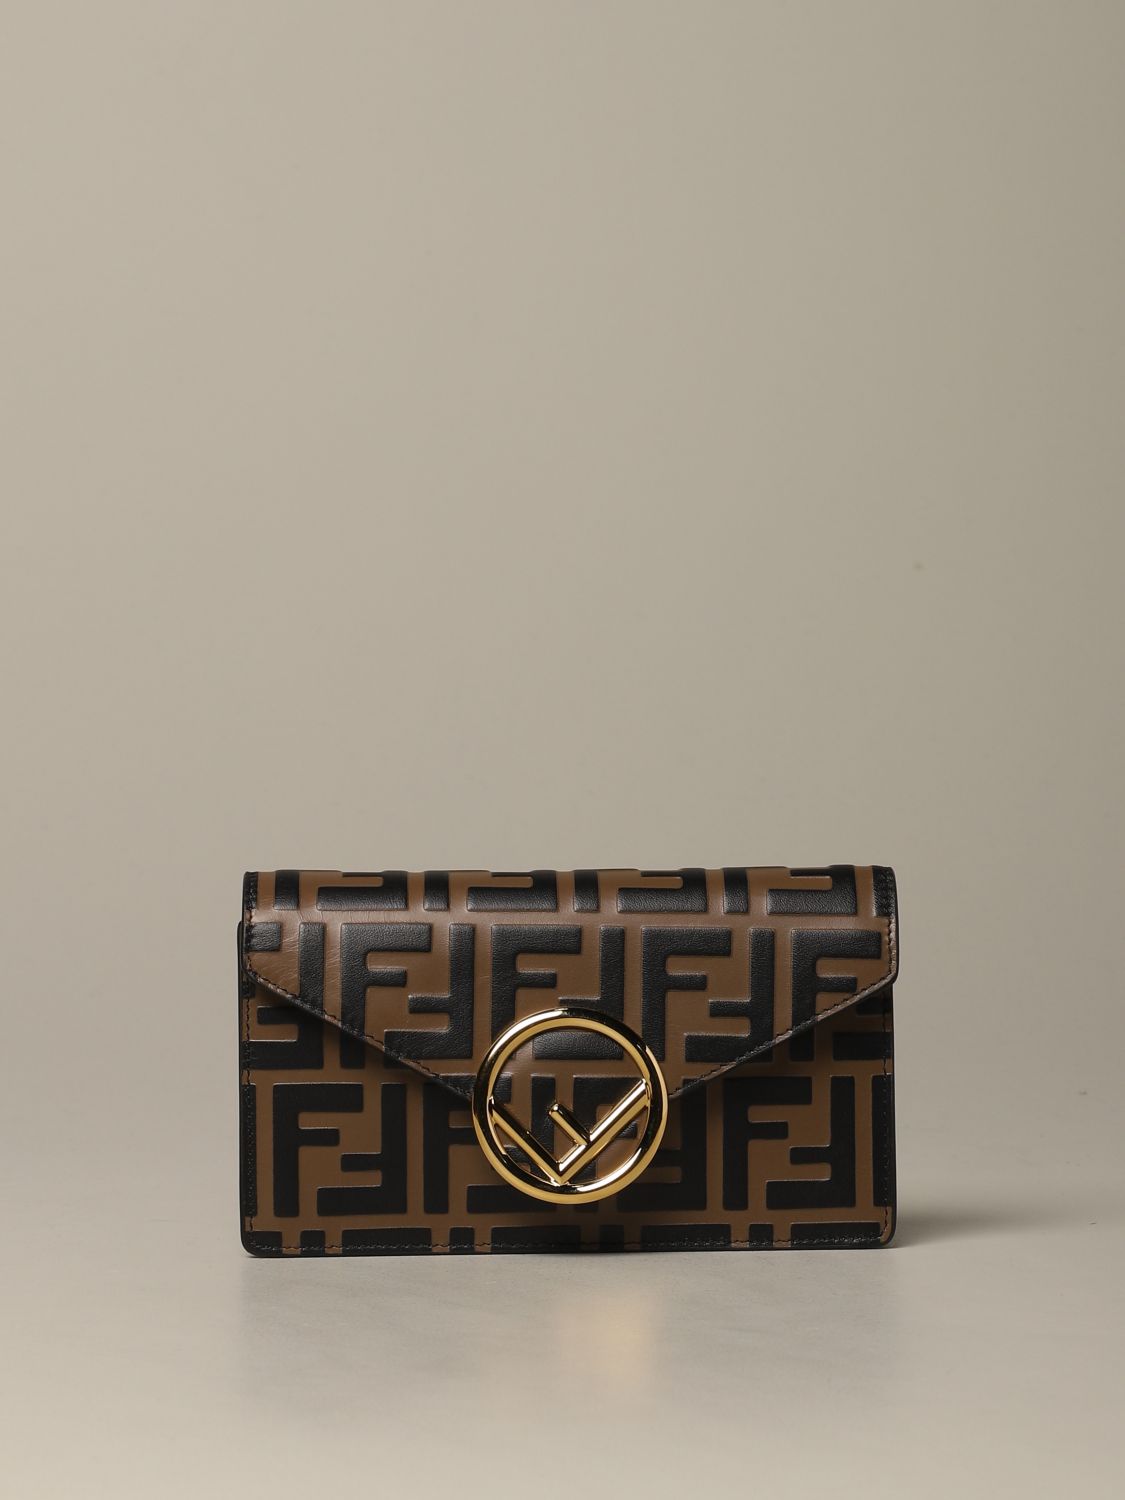 Fendi bag / pouch in leather with FF monogram